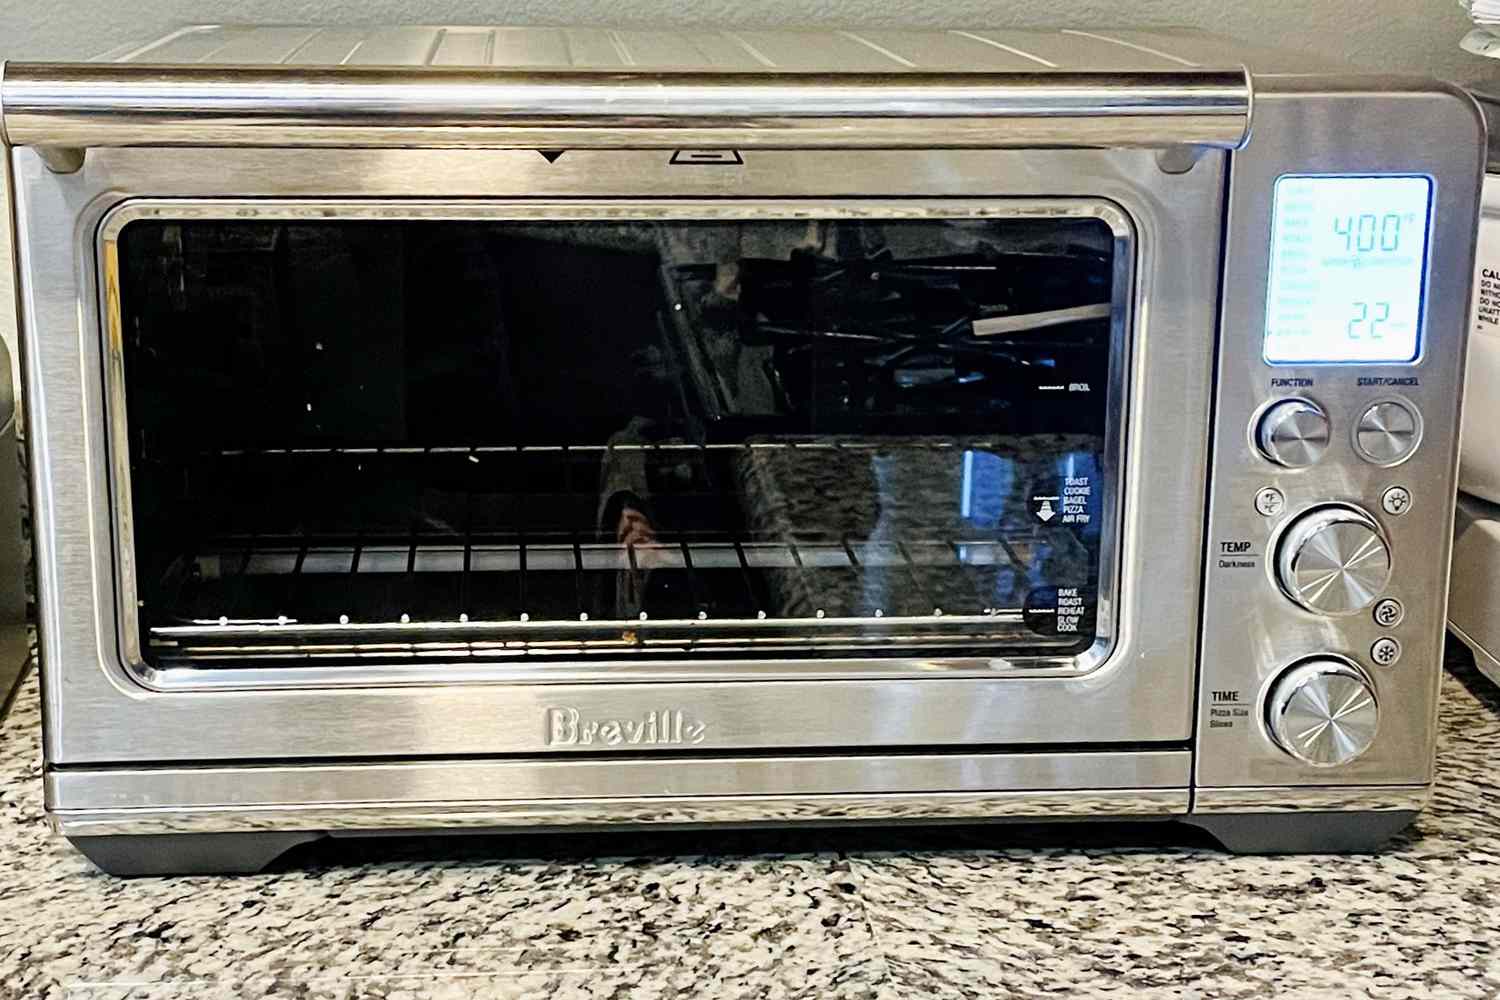 A Breville Smart Oven Air Fryer displayed on top of a kitchen counter